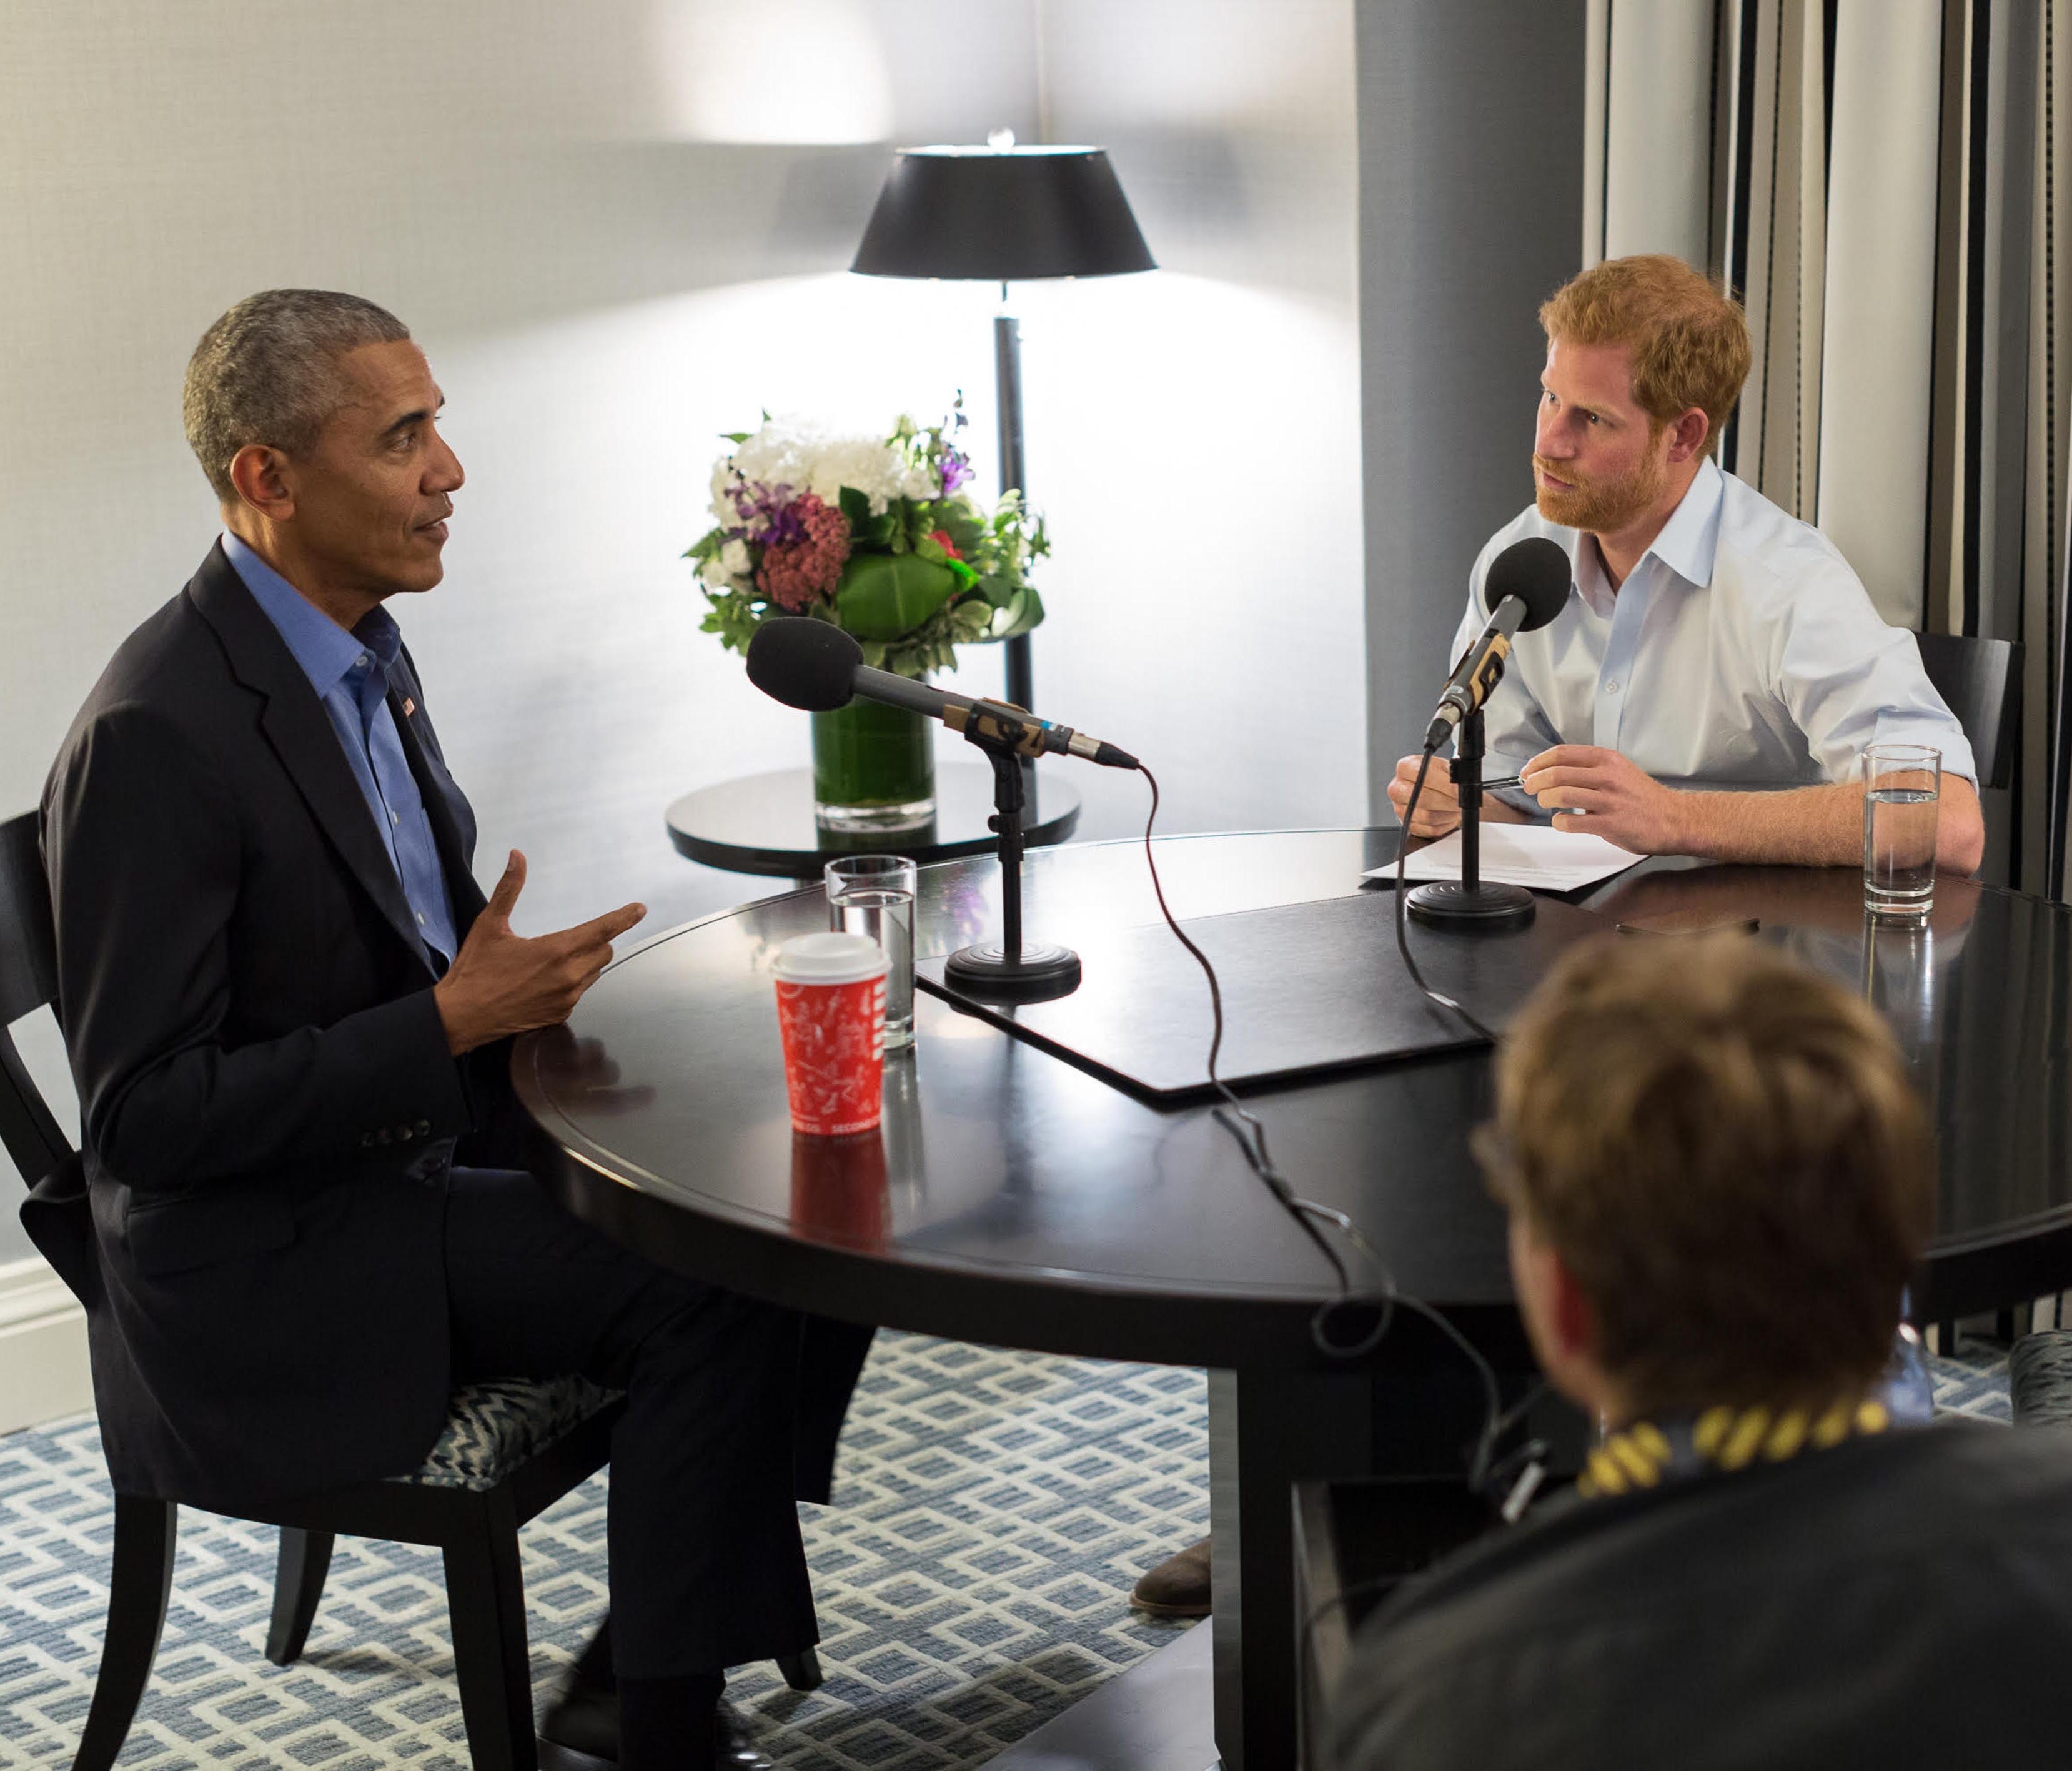 In this undated handout photo released by Kensington Palace, courtesy of the Obama Foundation, Prince Harry interviews former President Barack Obama as part of his guest editorship of BBC Radio 4's Today program.